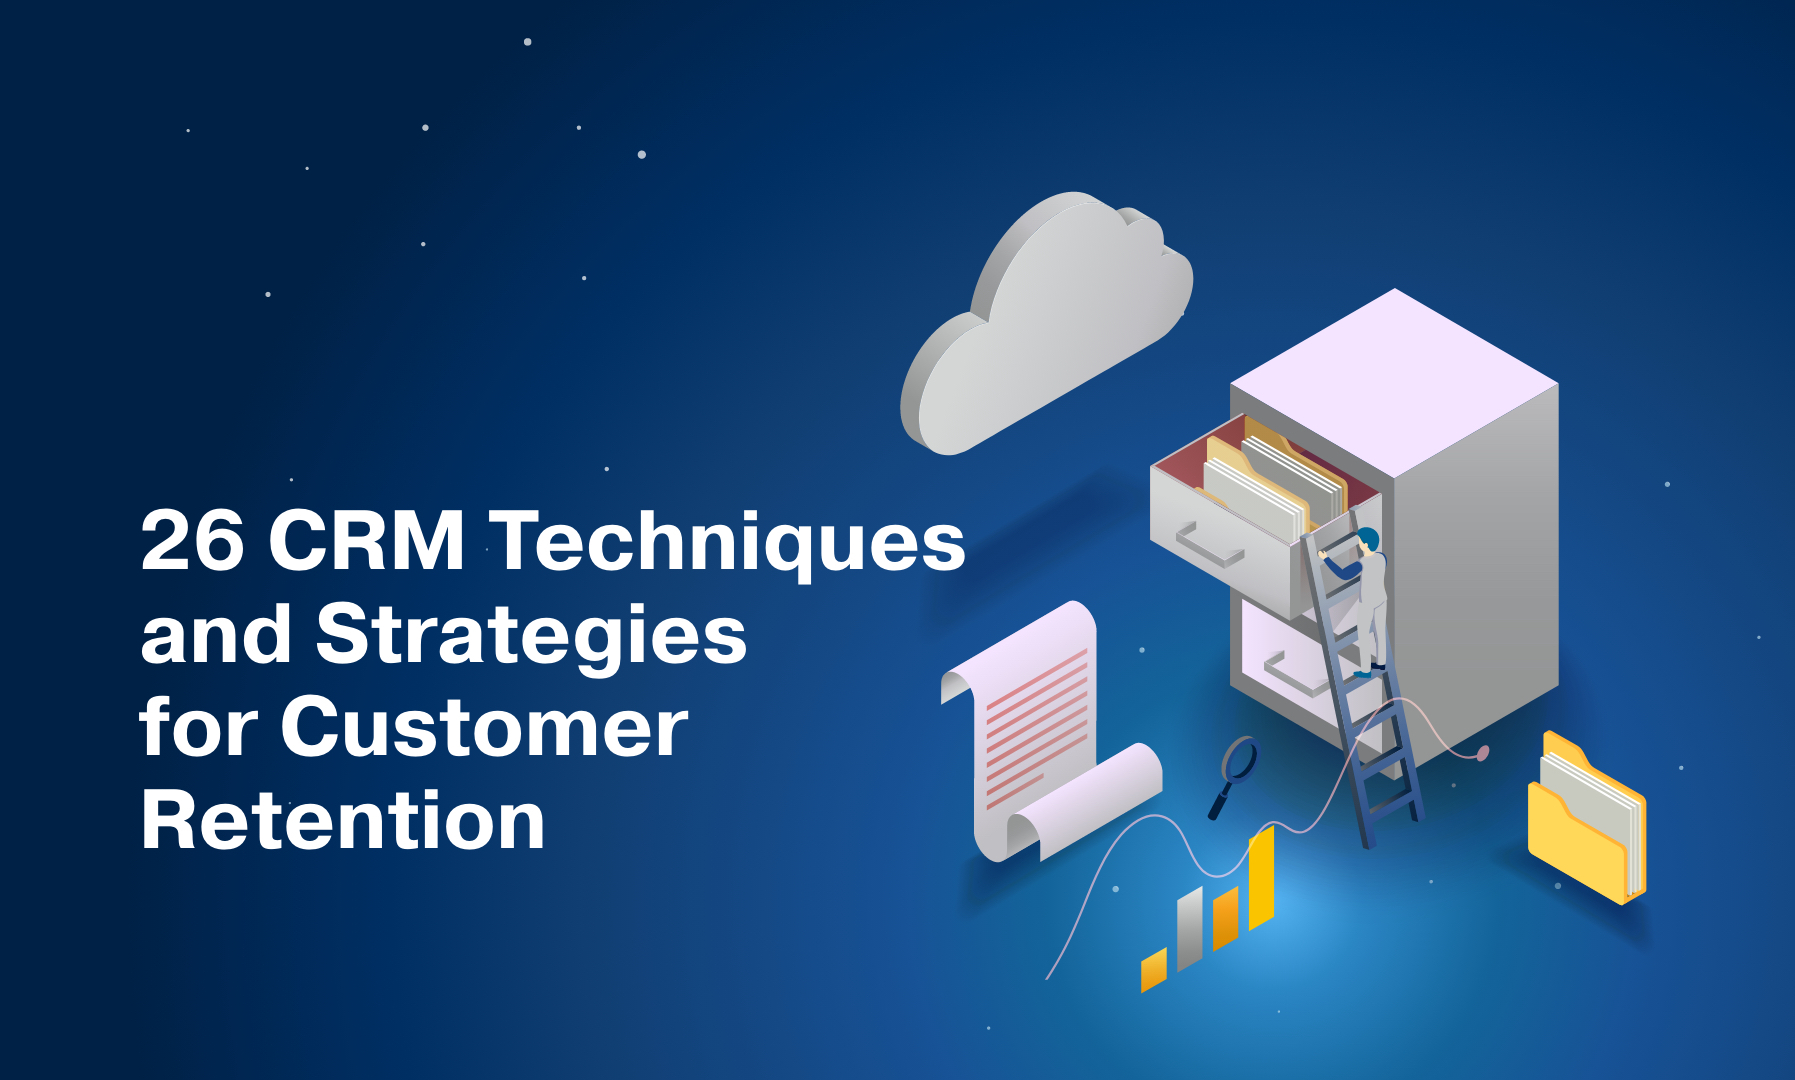 26 CRM Techniques and Strategies for Customer Retention | CIENCE